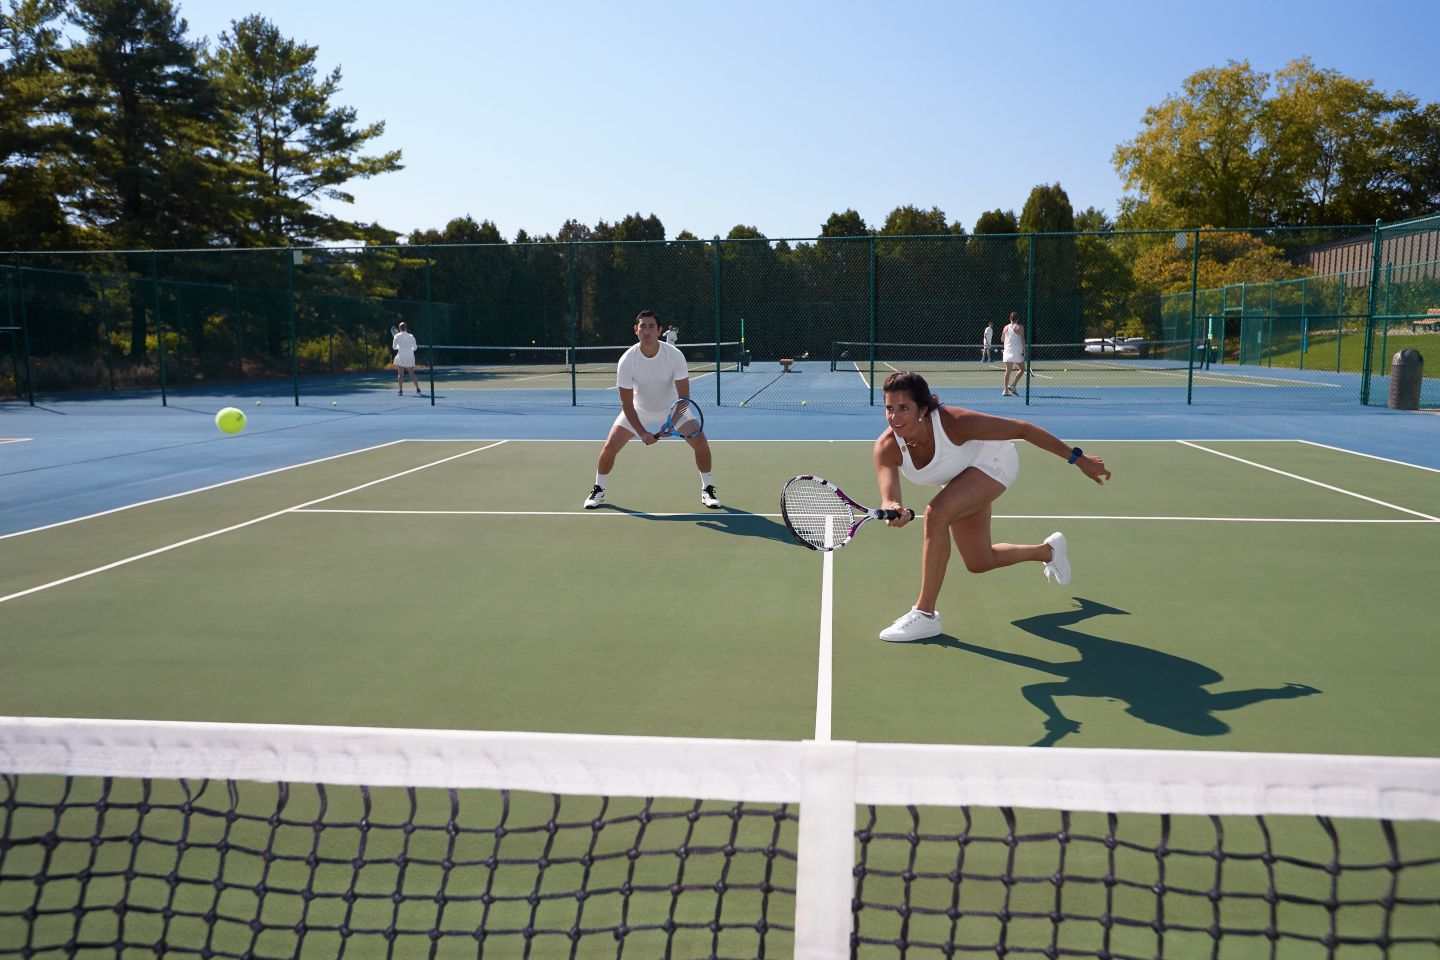 a lady hitting the ball over the net in a mixed doubles tennis match on an outdoor court